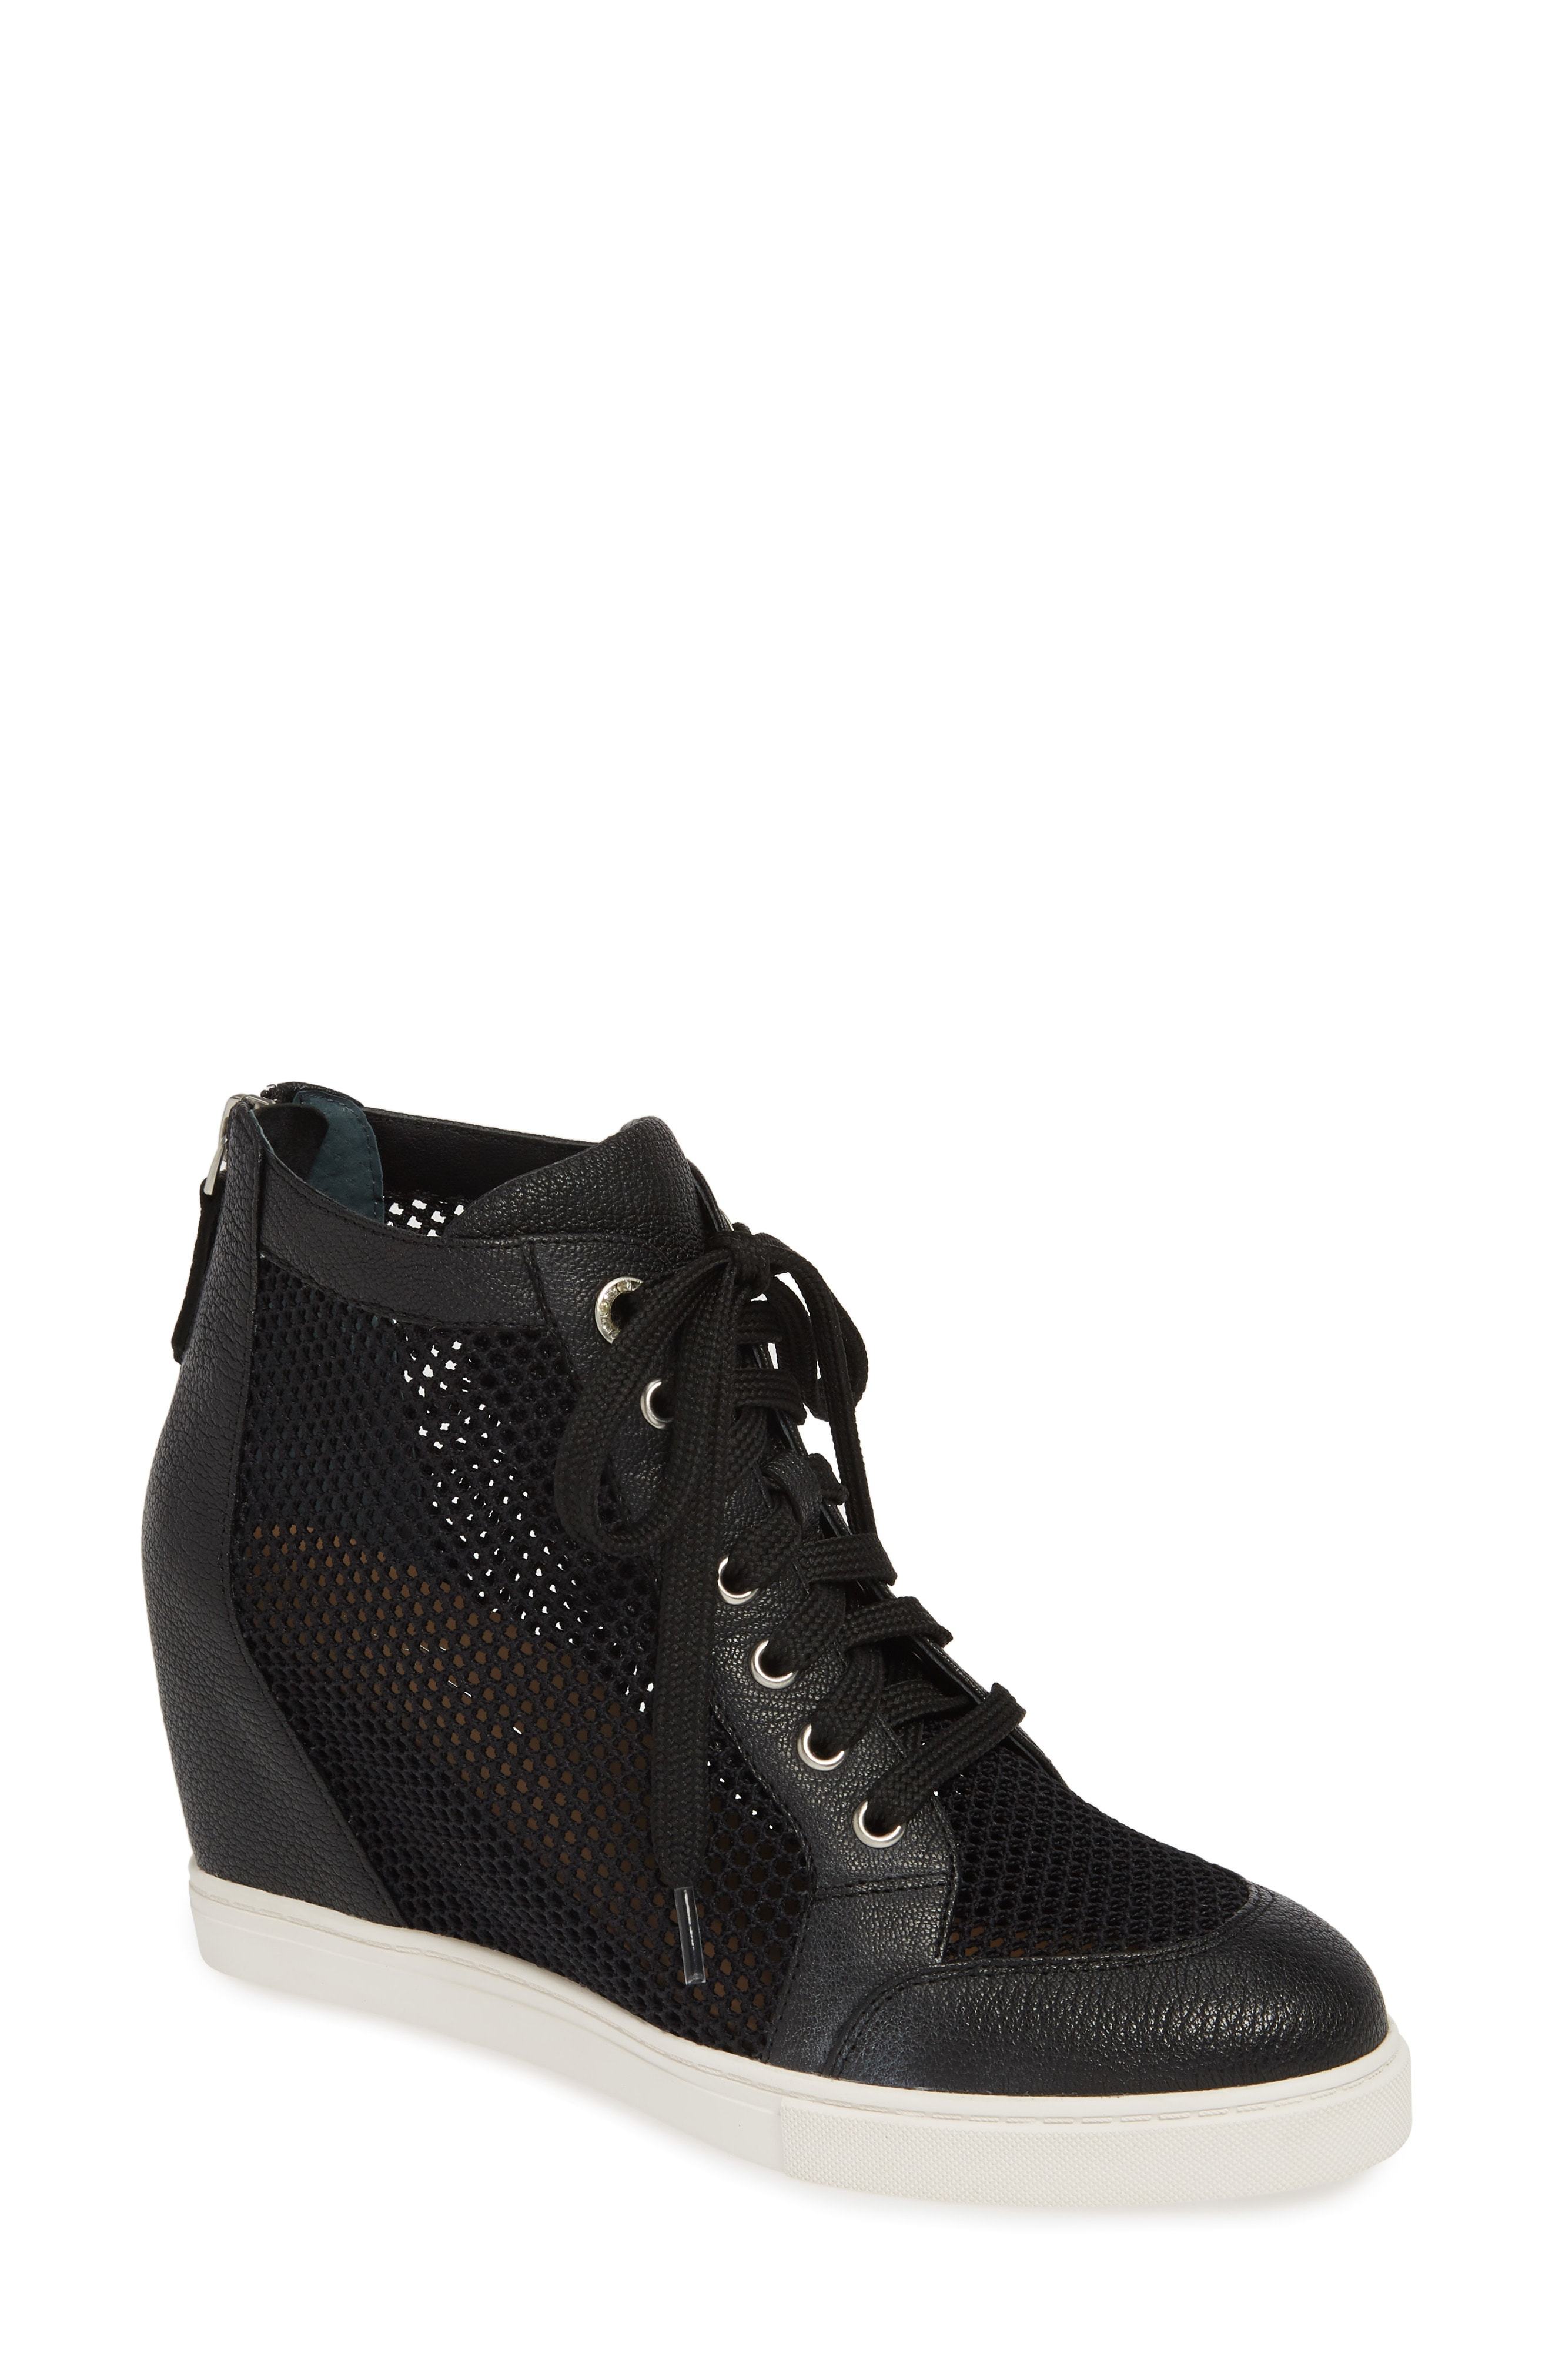 WISHBONE EMILY WEDGE SNEAKER - Black Leather | Browns Shoes